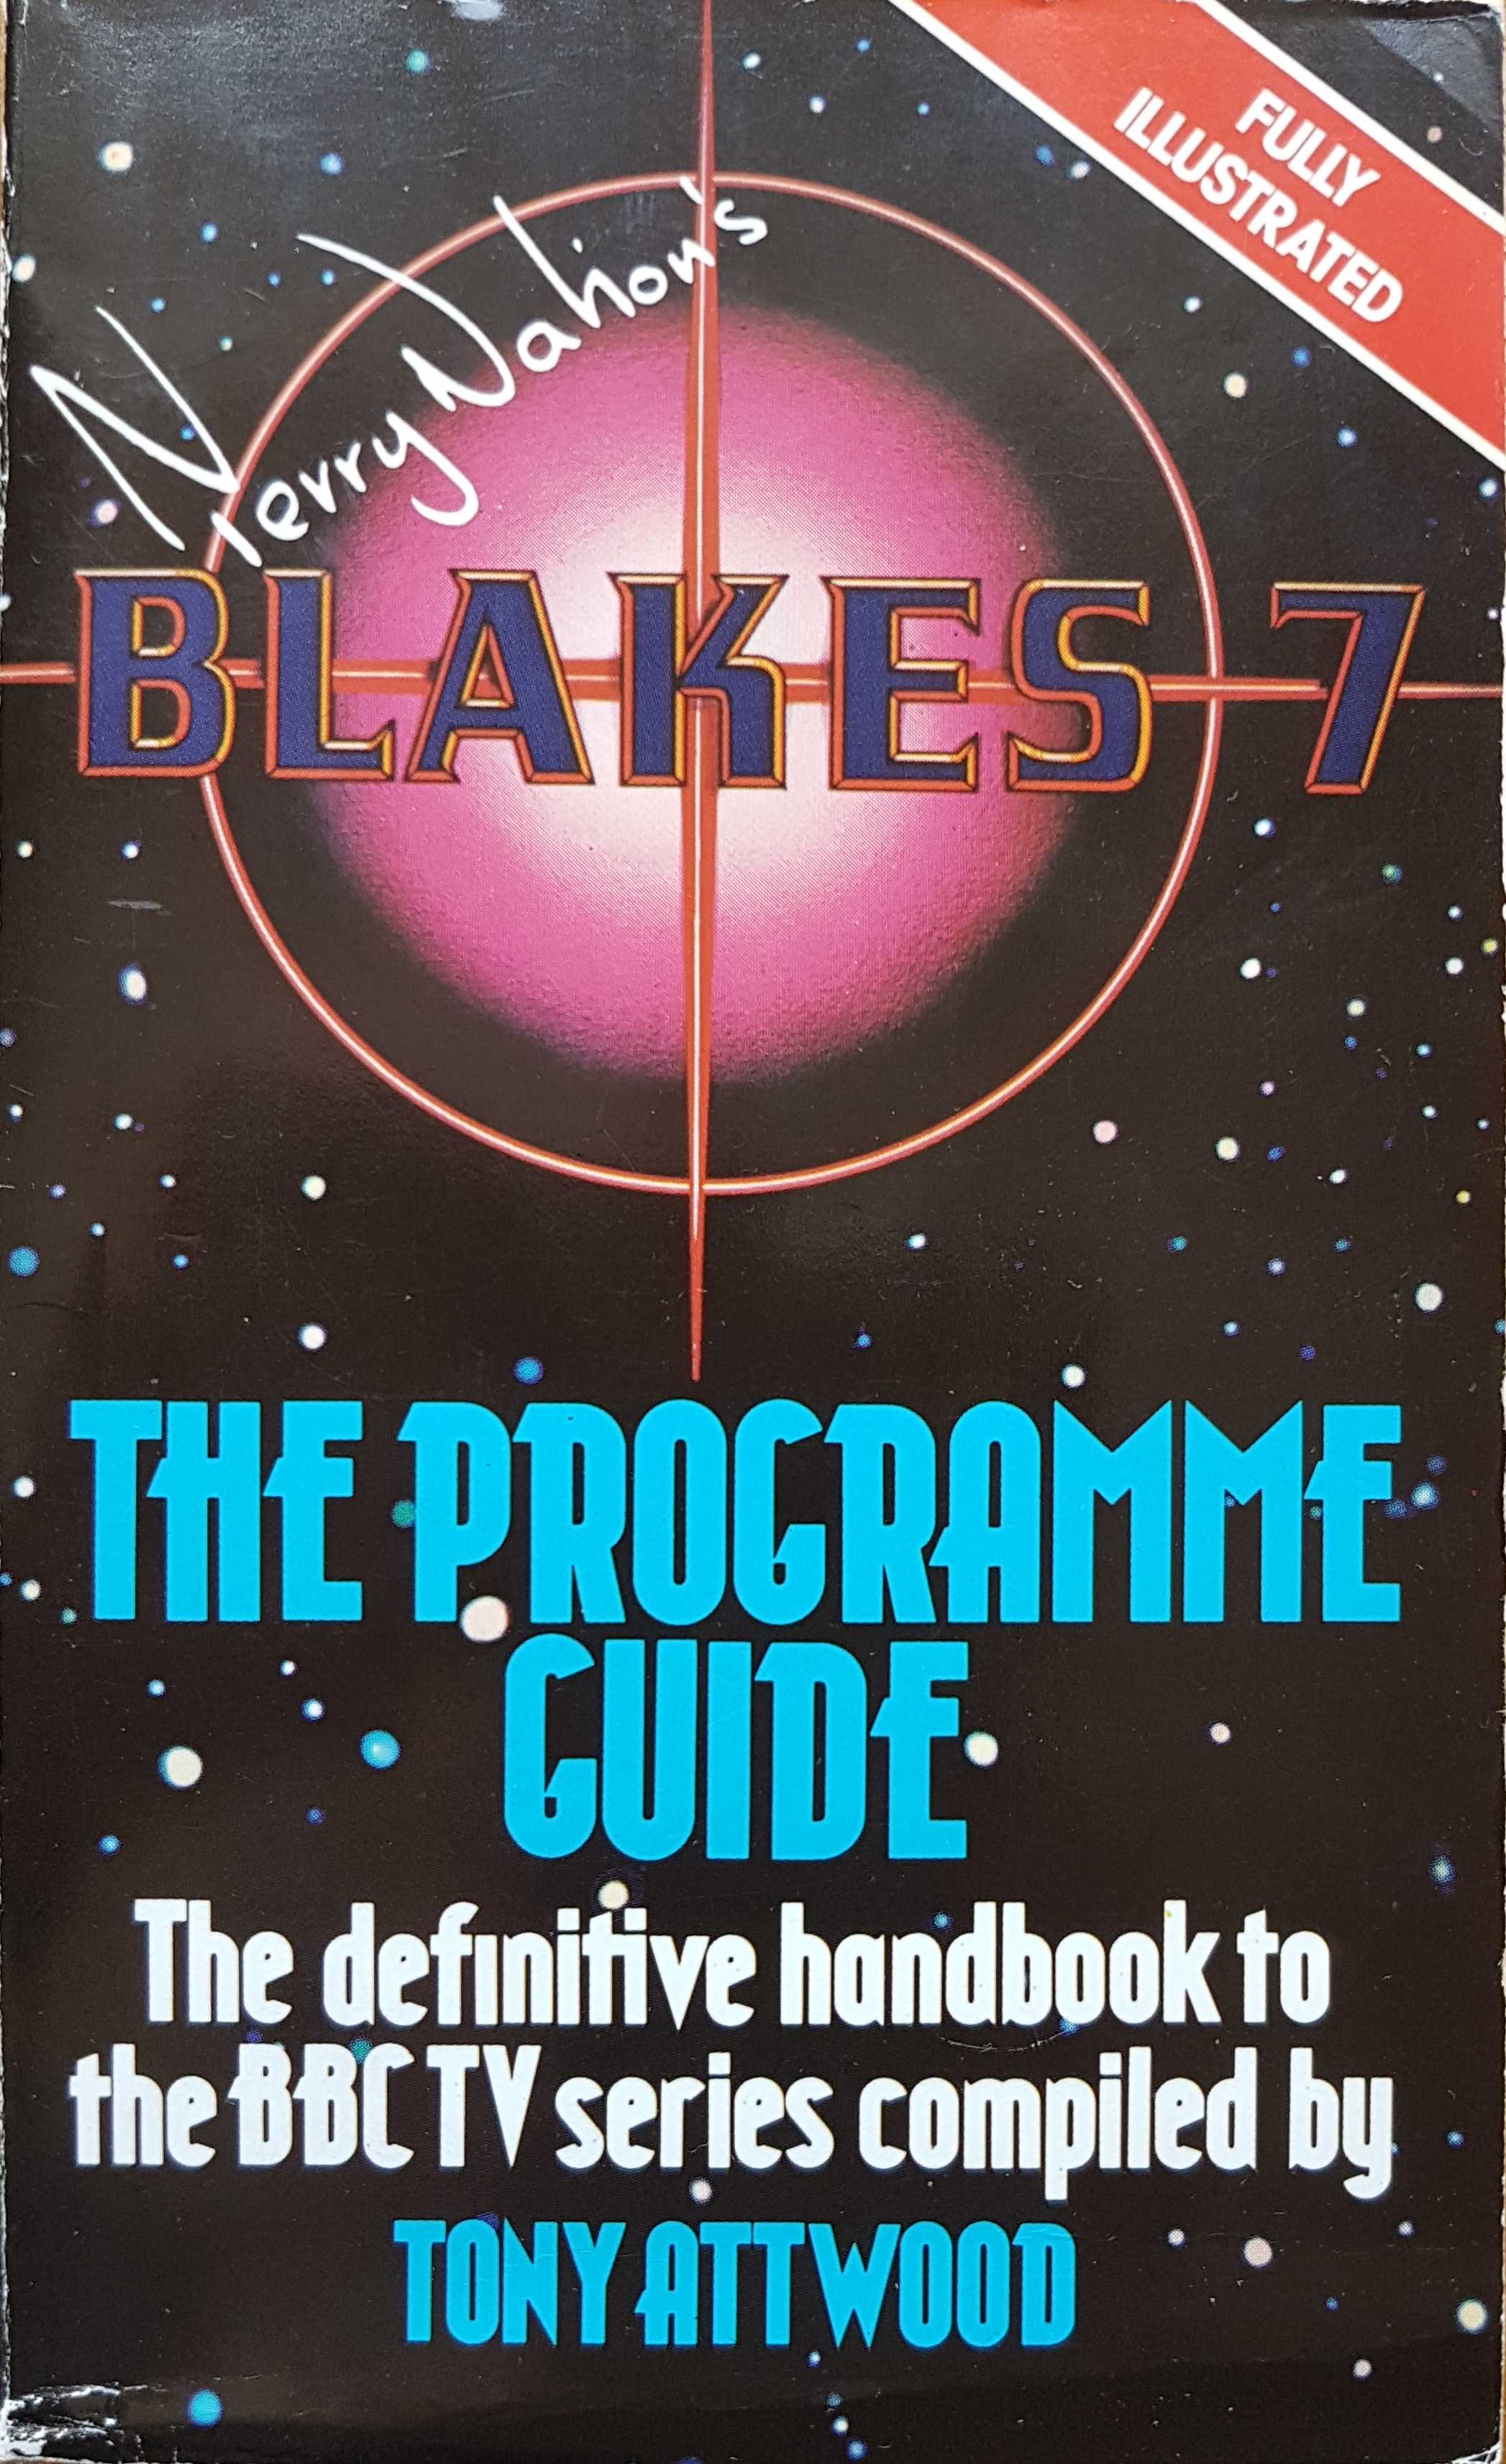 Picture of 0-426-19449-7 Blake's 7 - Programme guide by artist Tony Attwood from the BBC books - Records and Tapes library